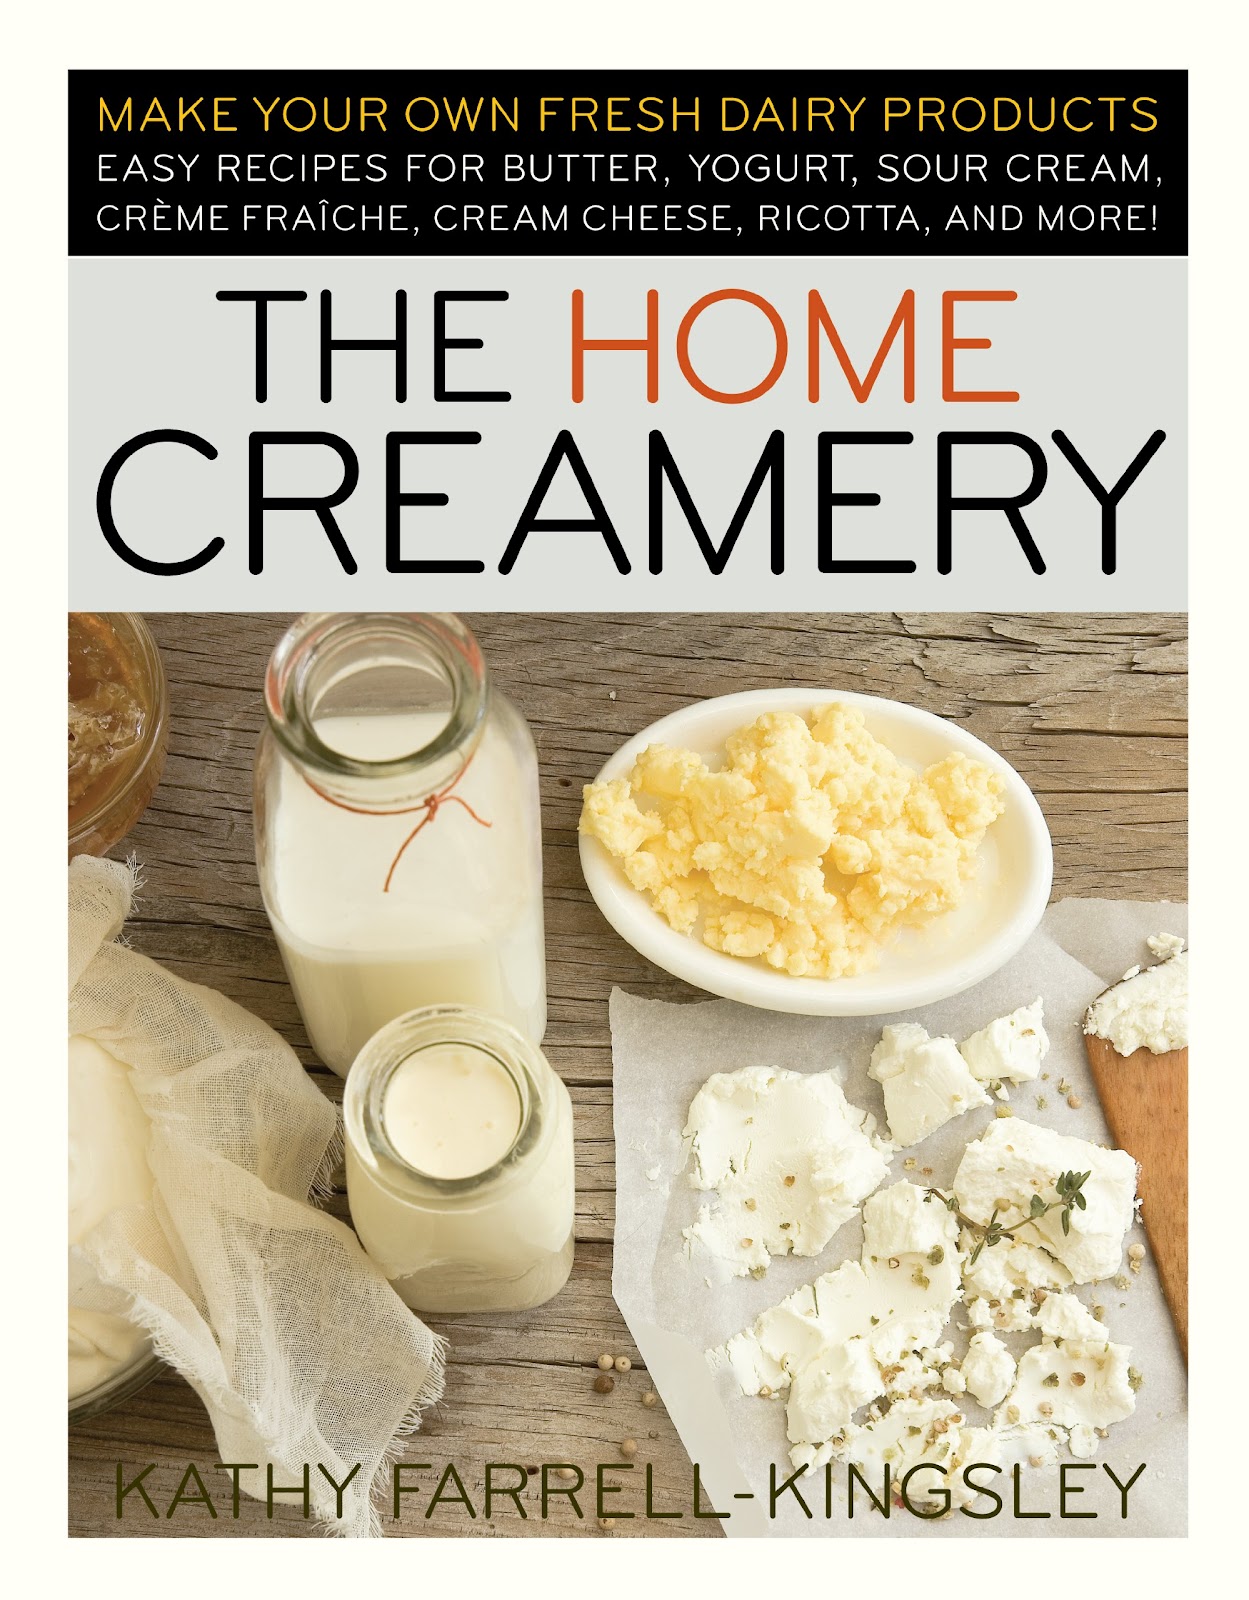 Free Ebook - The Home Creamery: Make Your Own Fresh Dairy Products; Easy Recipes for Butter, Yogurt, Sour Cream, Creme Fraiche, Cream Cheese, Ricotta, and More!